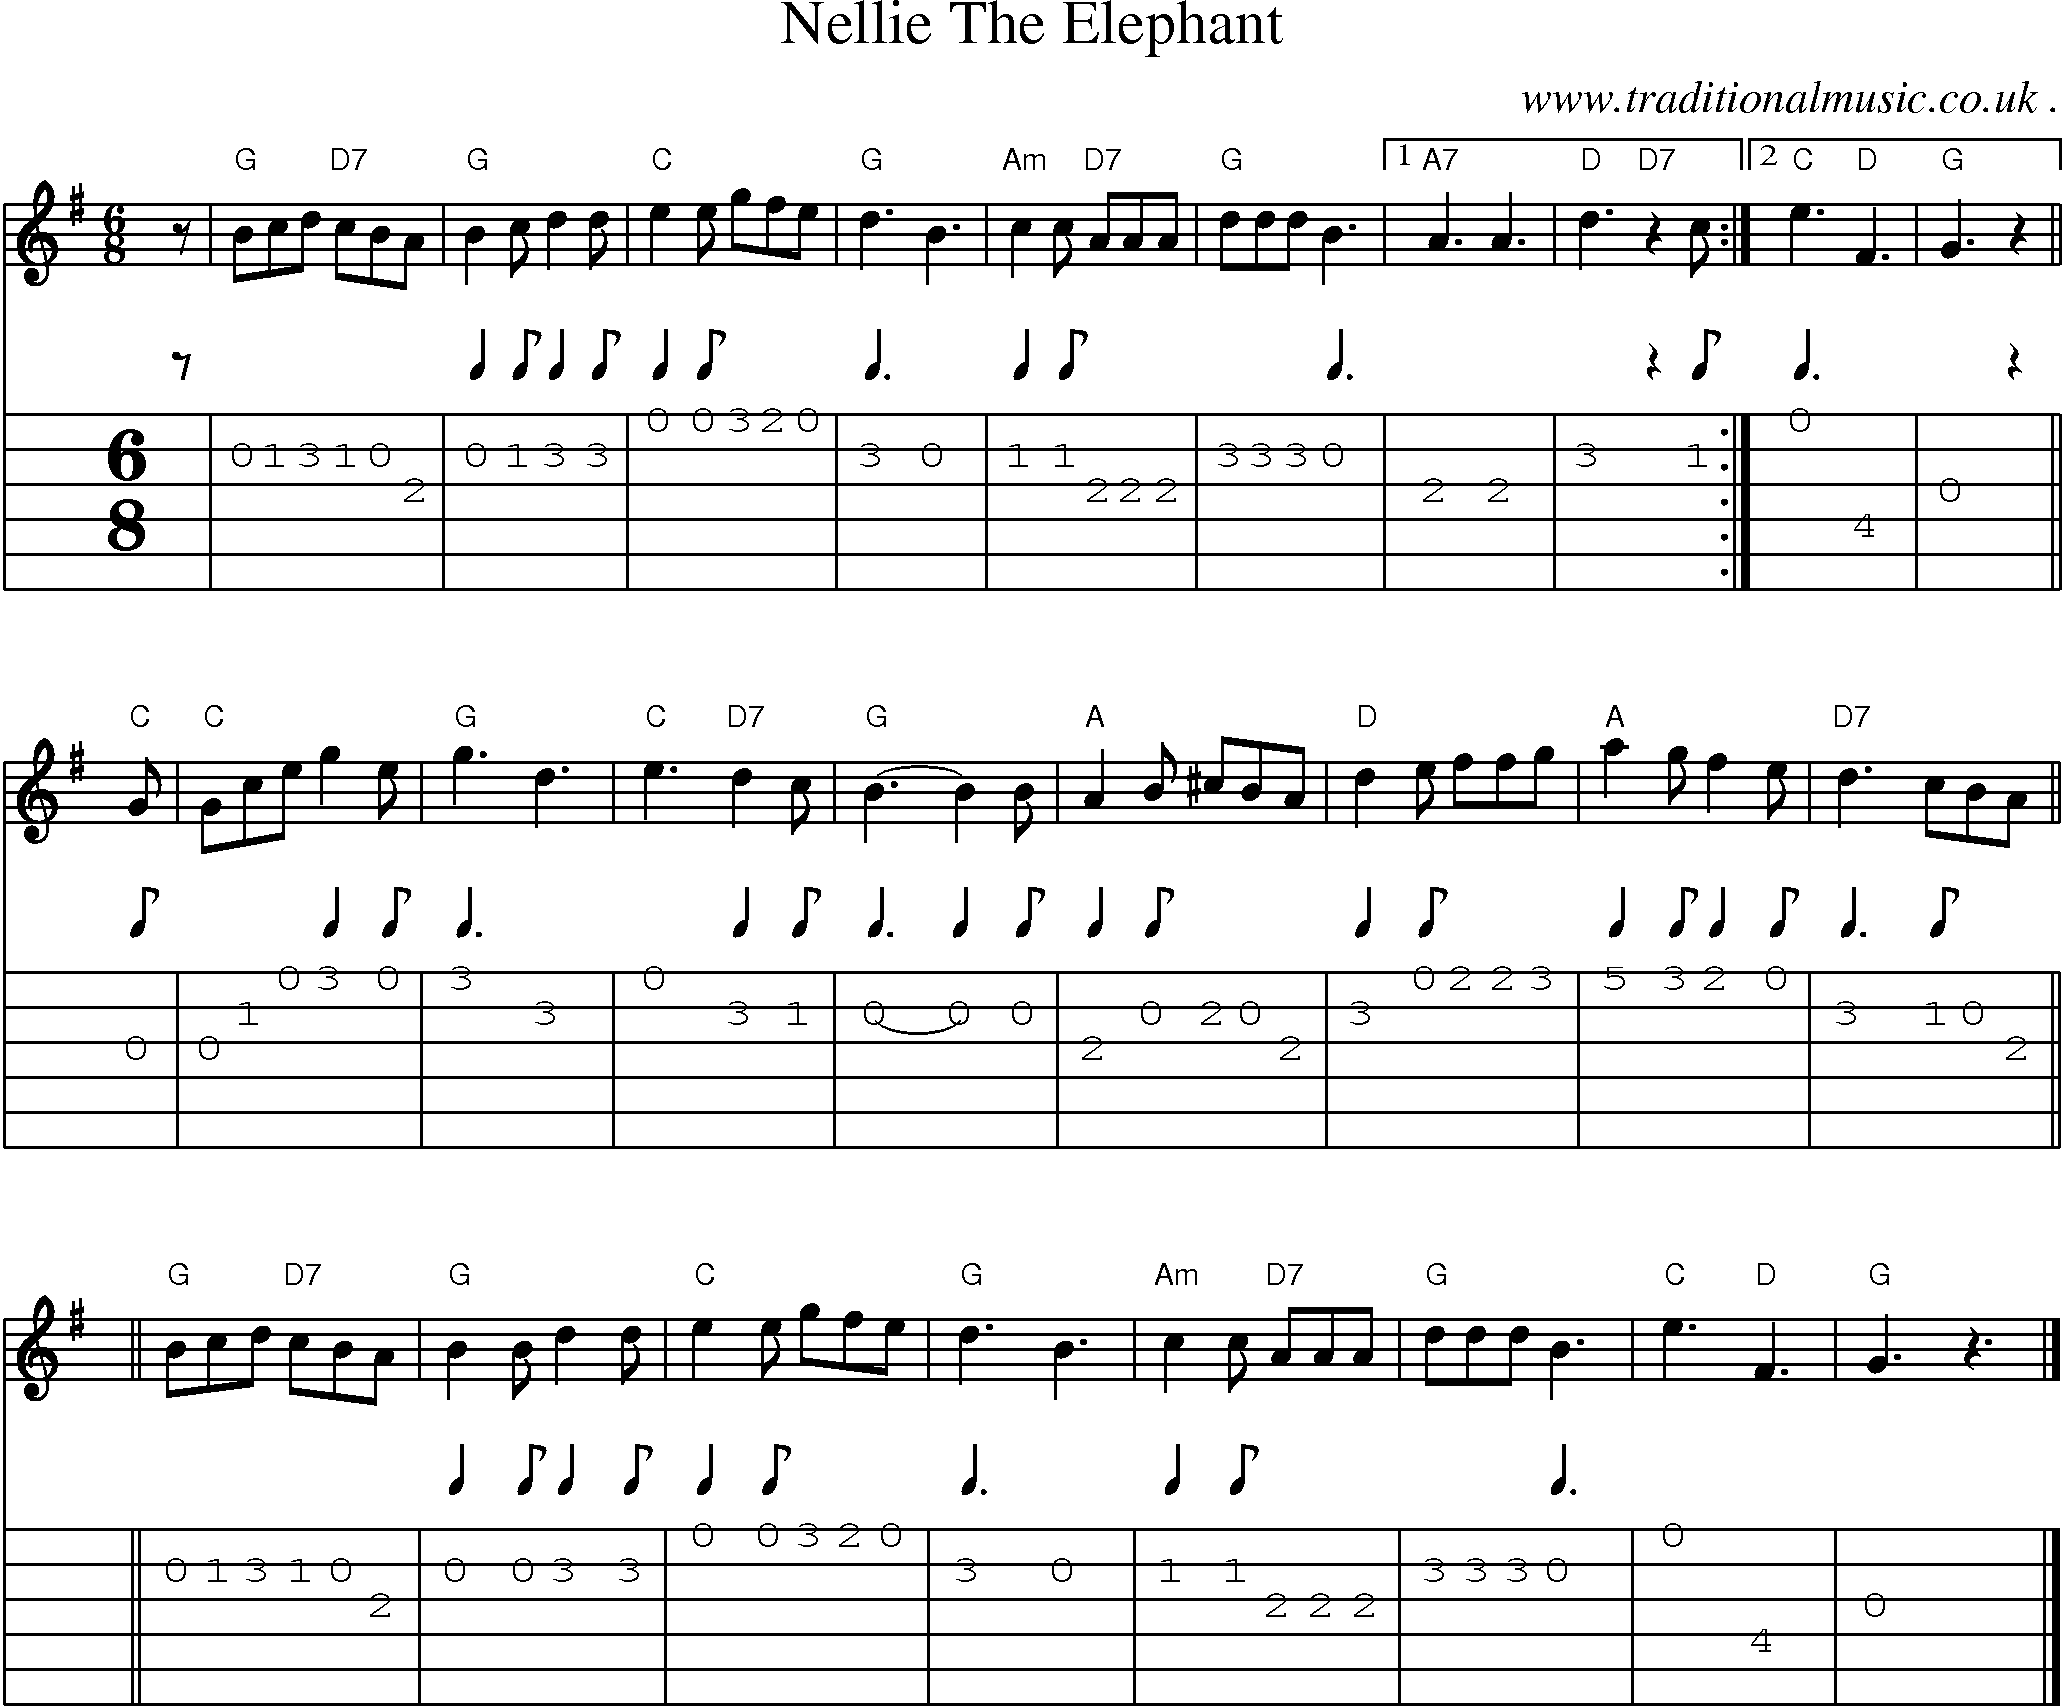 Sheet-music  score, Chords and Guitar Tabs for Nellie The Elephant